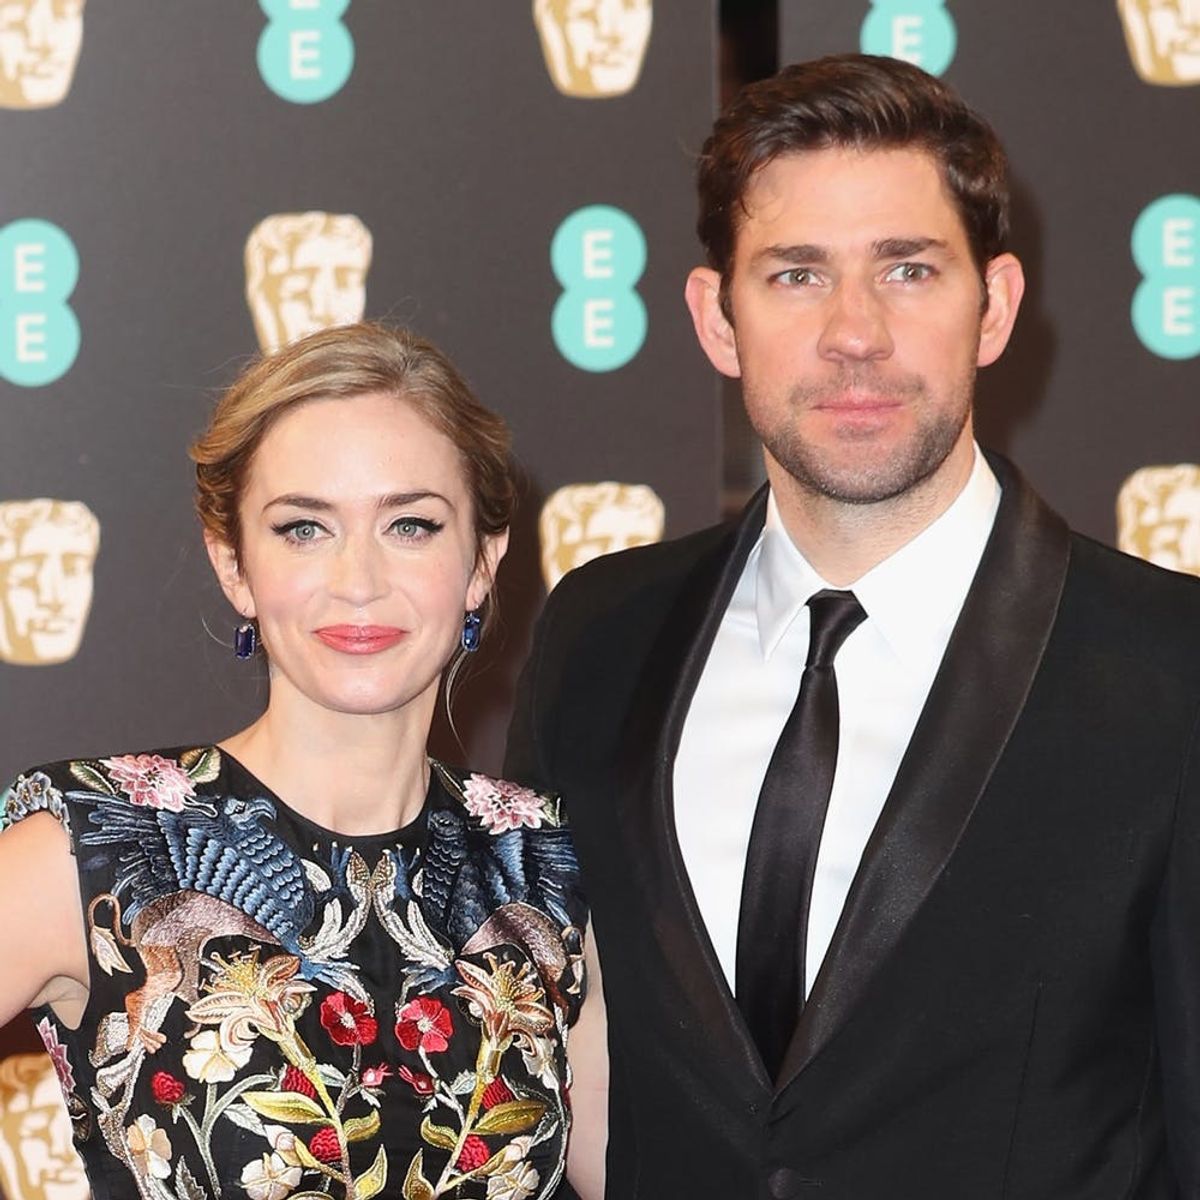 John Krasinski Announced That He Was Working on a Film With Wife Emily Blunt in the Sweetest Way Possible